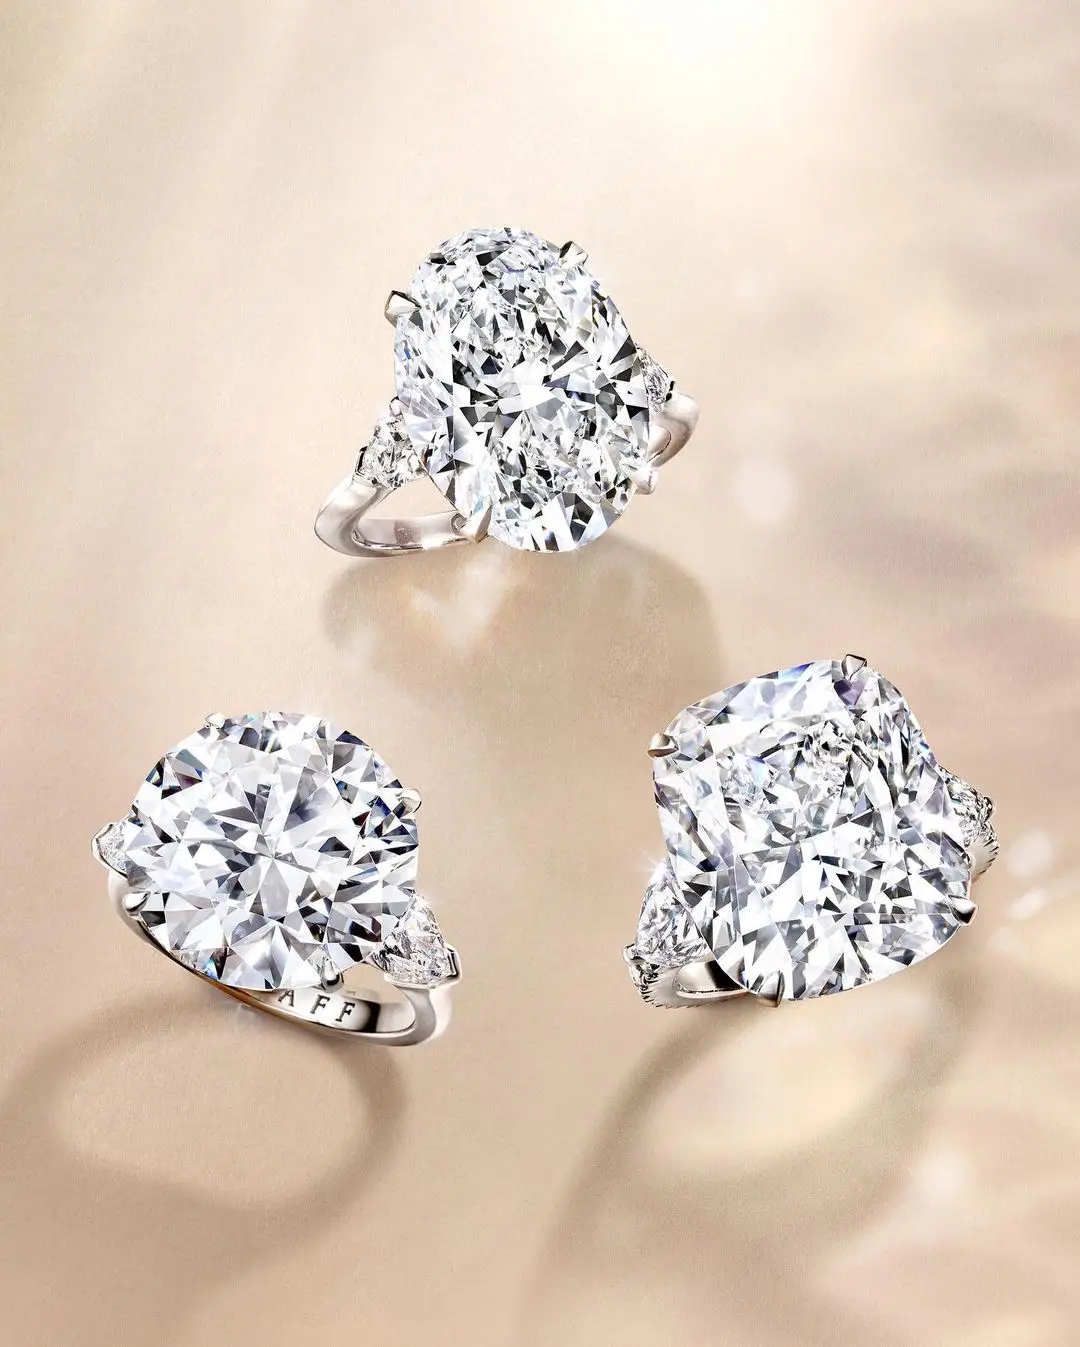 21 Most Astonishing Engagement Rings Youve Ever Seen ...